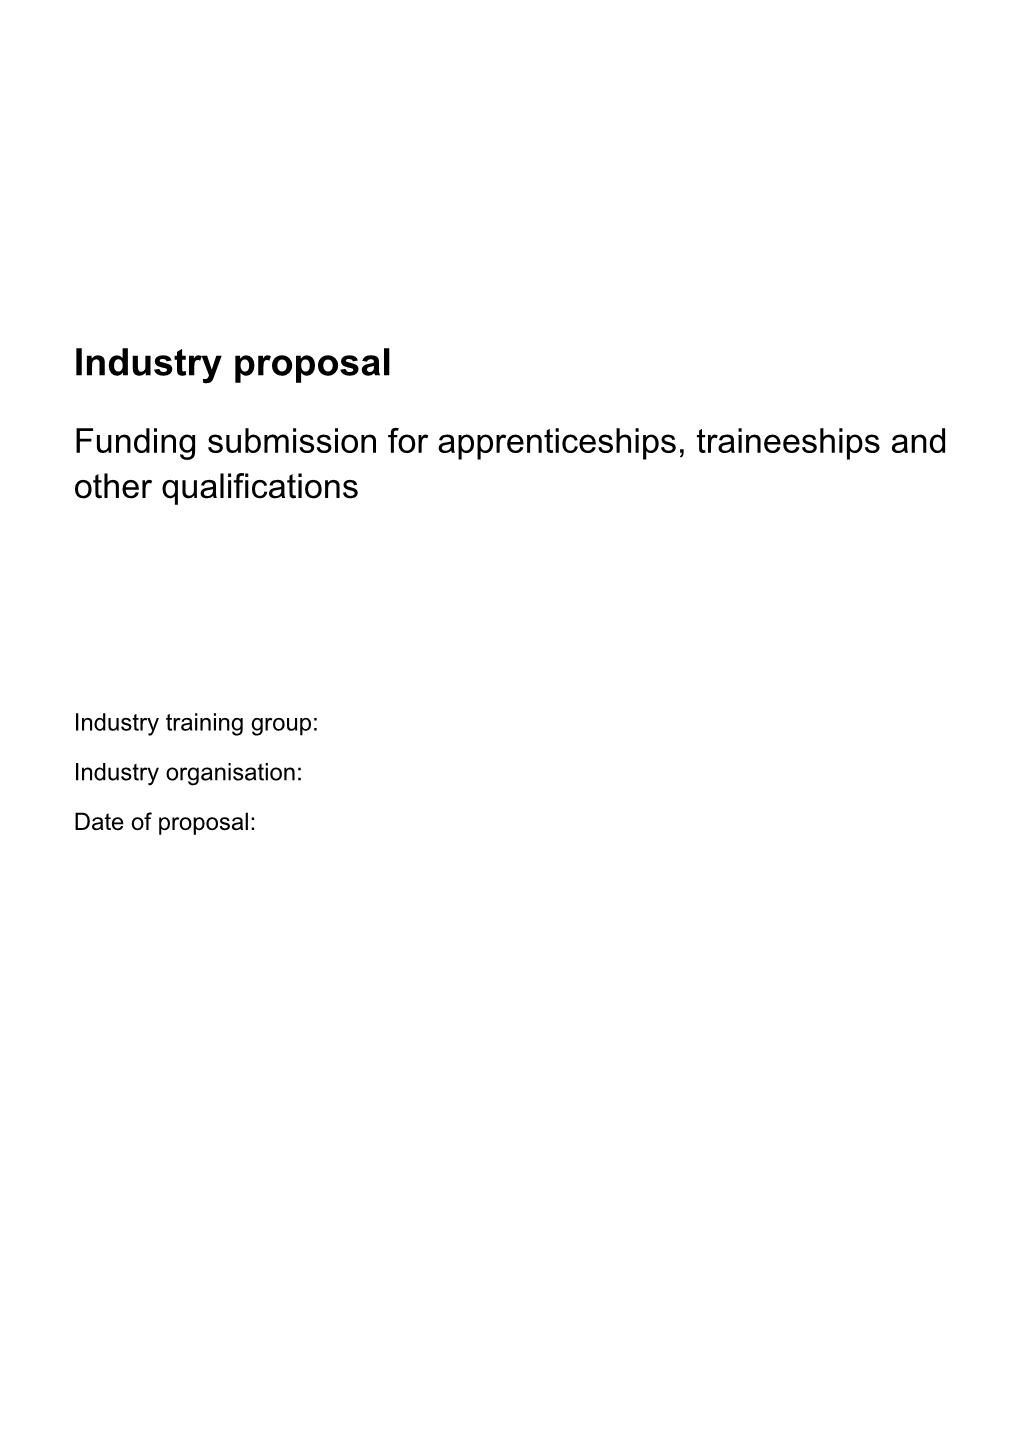 Industry Proposal - Funding Submission for Apprenticeships, Traineeships and Other